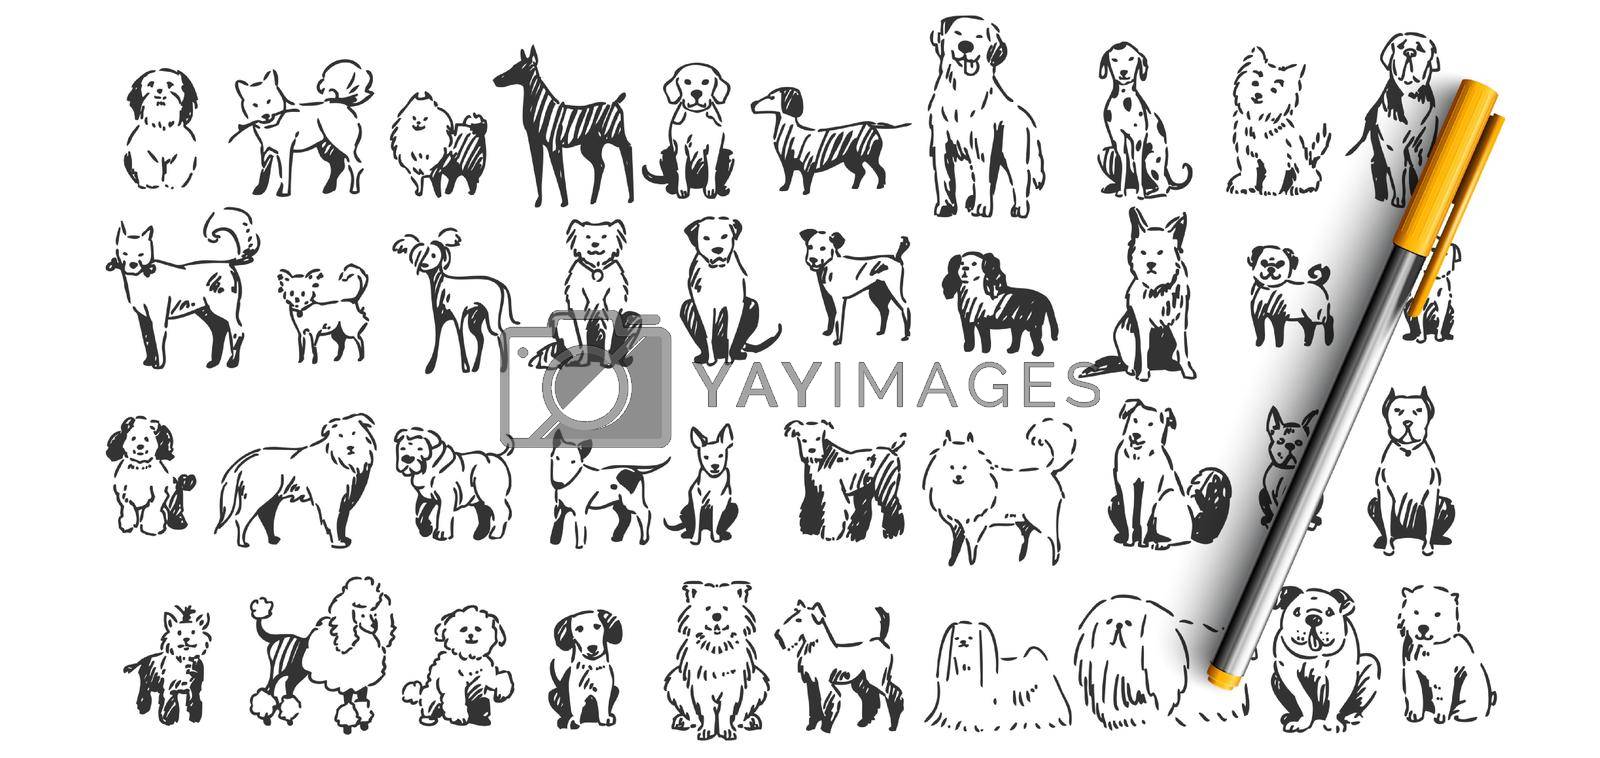 Dogs doodle set. Collection of hand drawn pencil ink drawing sketches templates patterns of domestic animals puppies dolmatins chihuahua pug spitz pets on white background. Human friends illustration.